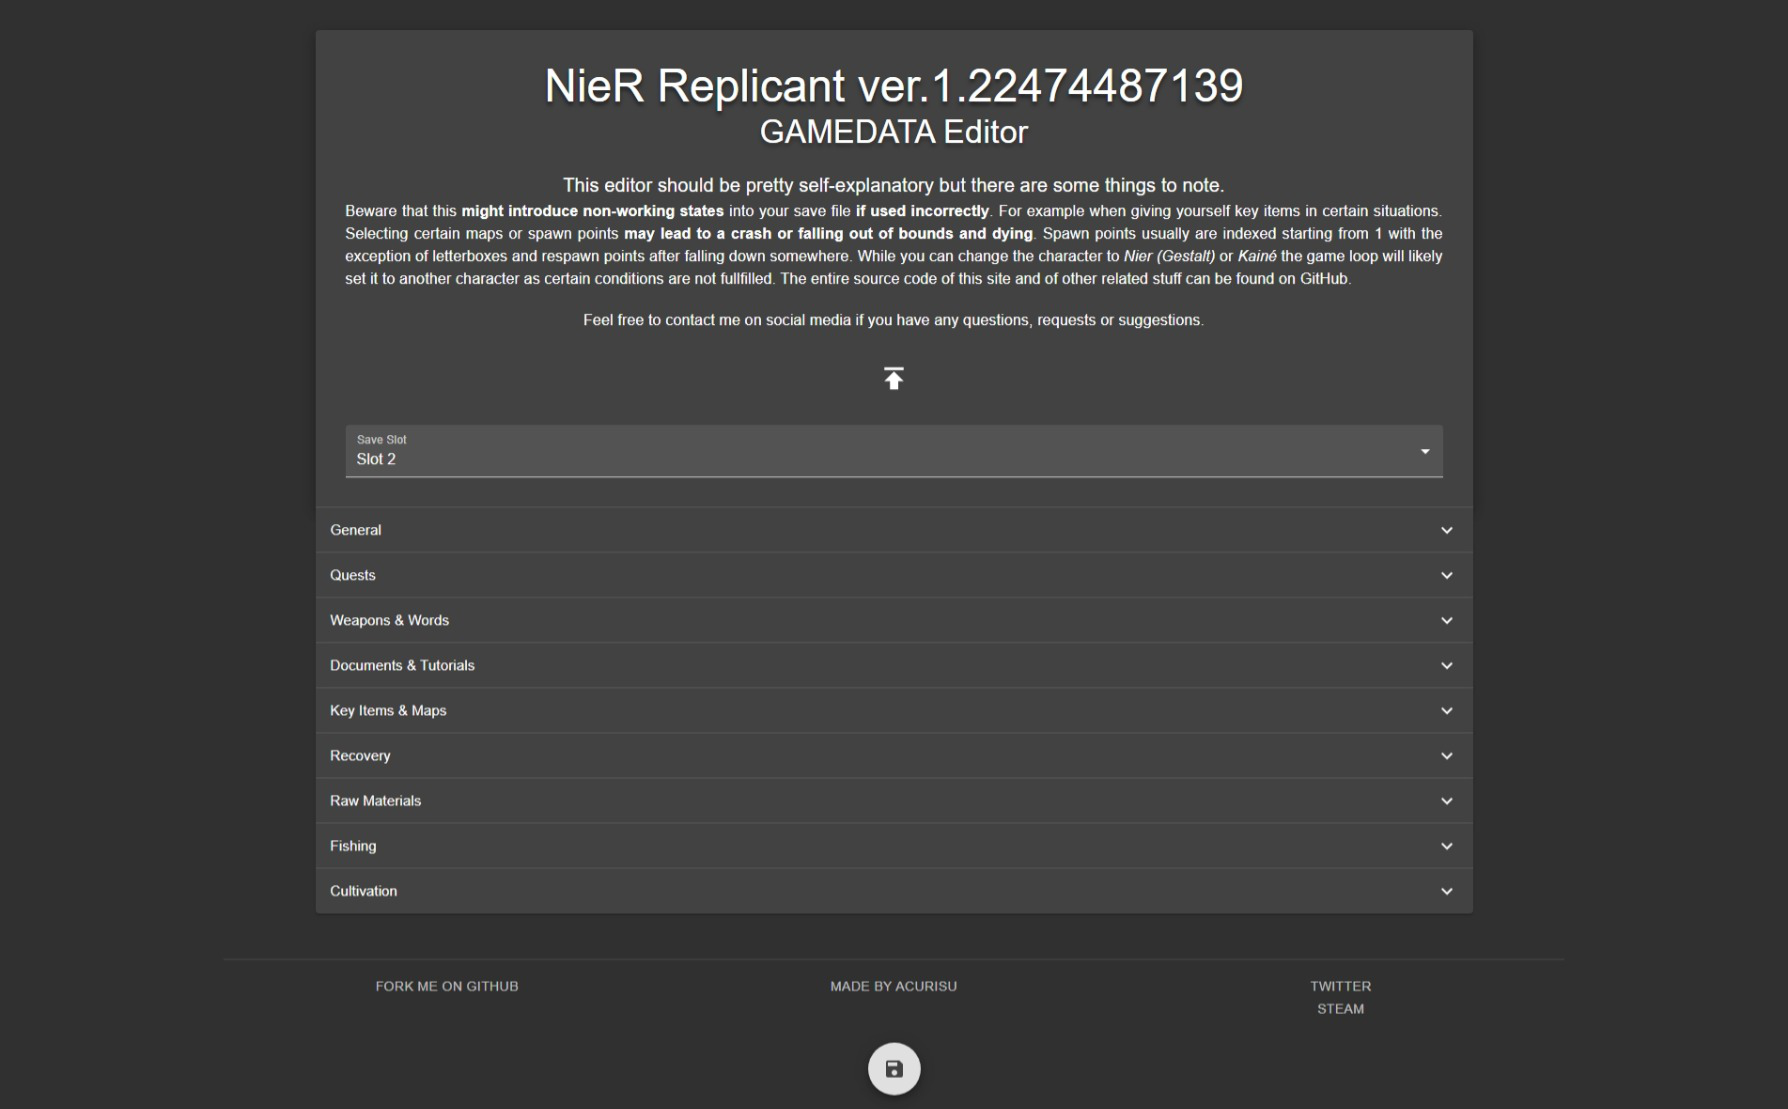 NieR Replicant ver.1.22474487139... - How to edit your save file (GAMEDATA)